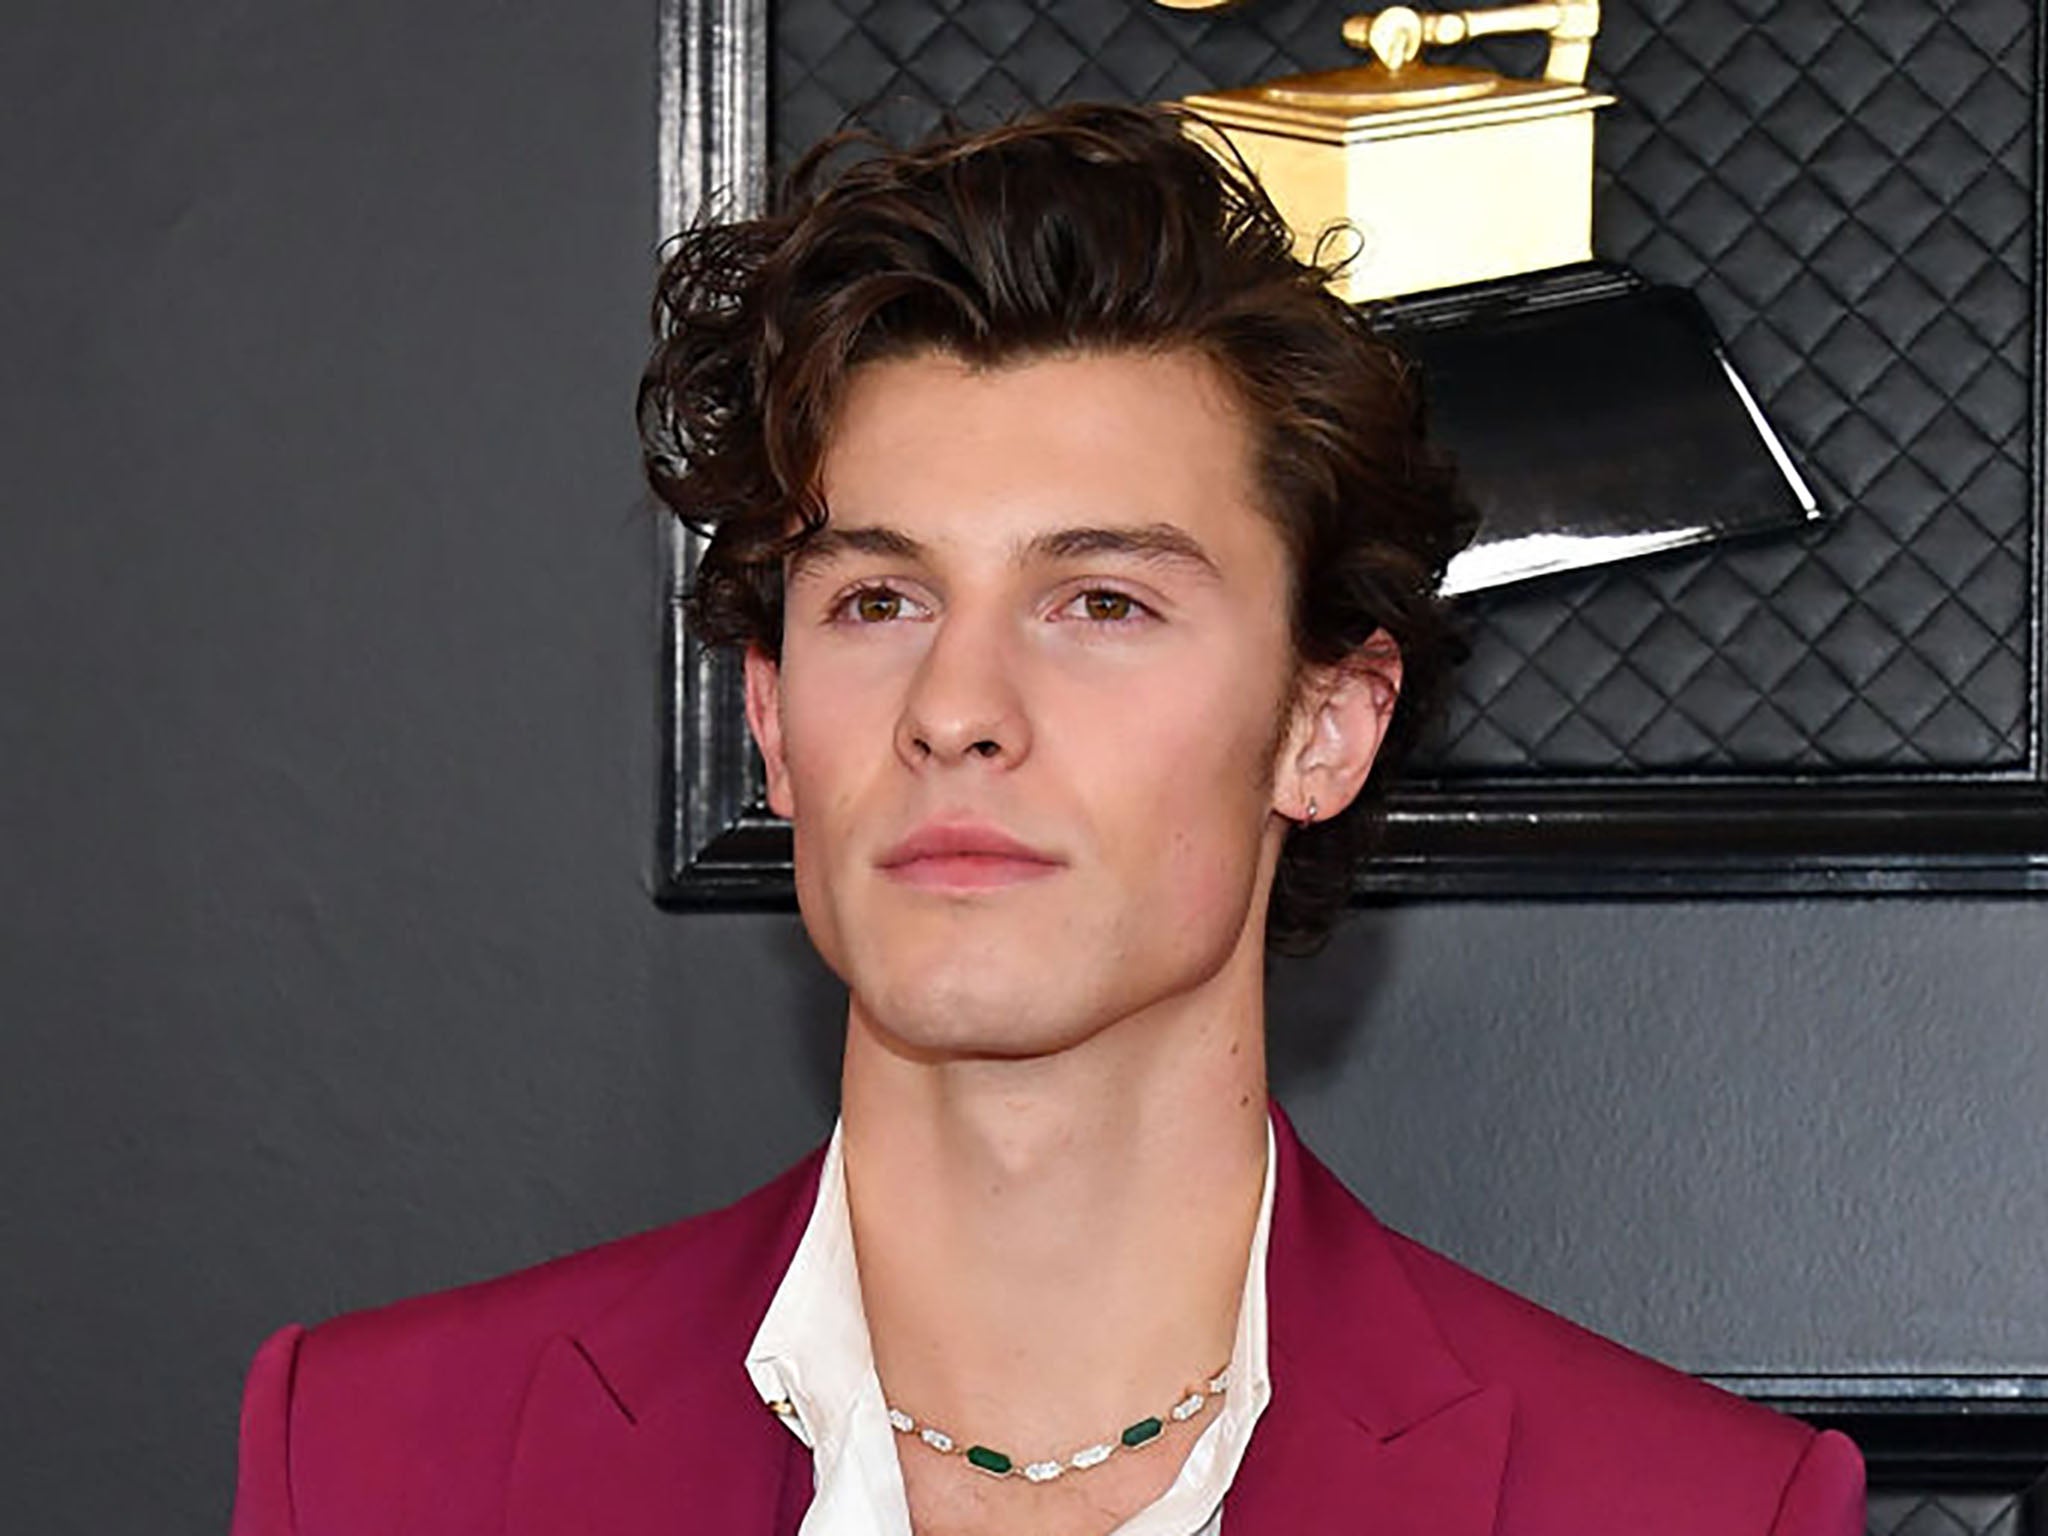 Shawn Mendes Chops Off His Signature Locks, Debuts New Short Hairstyle